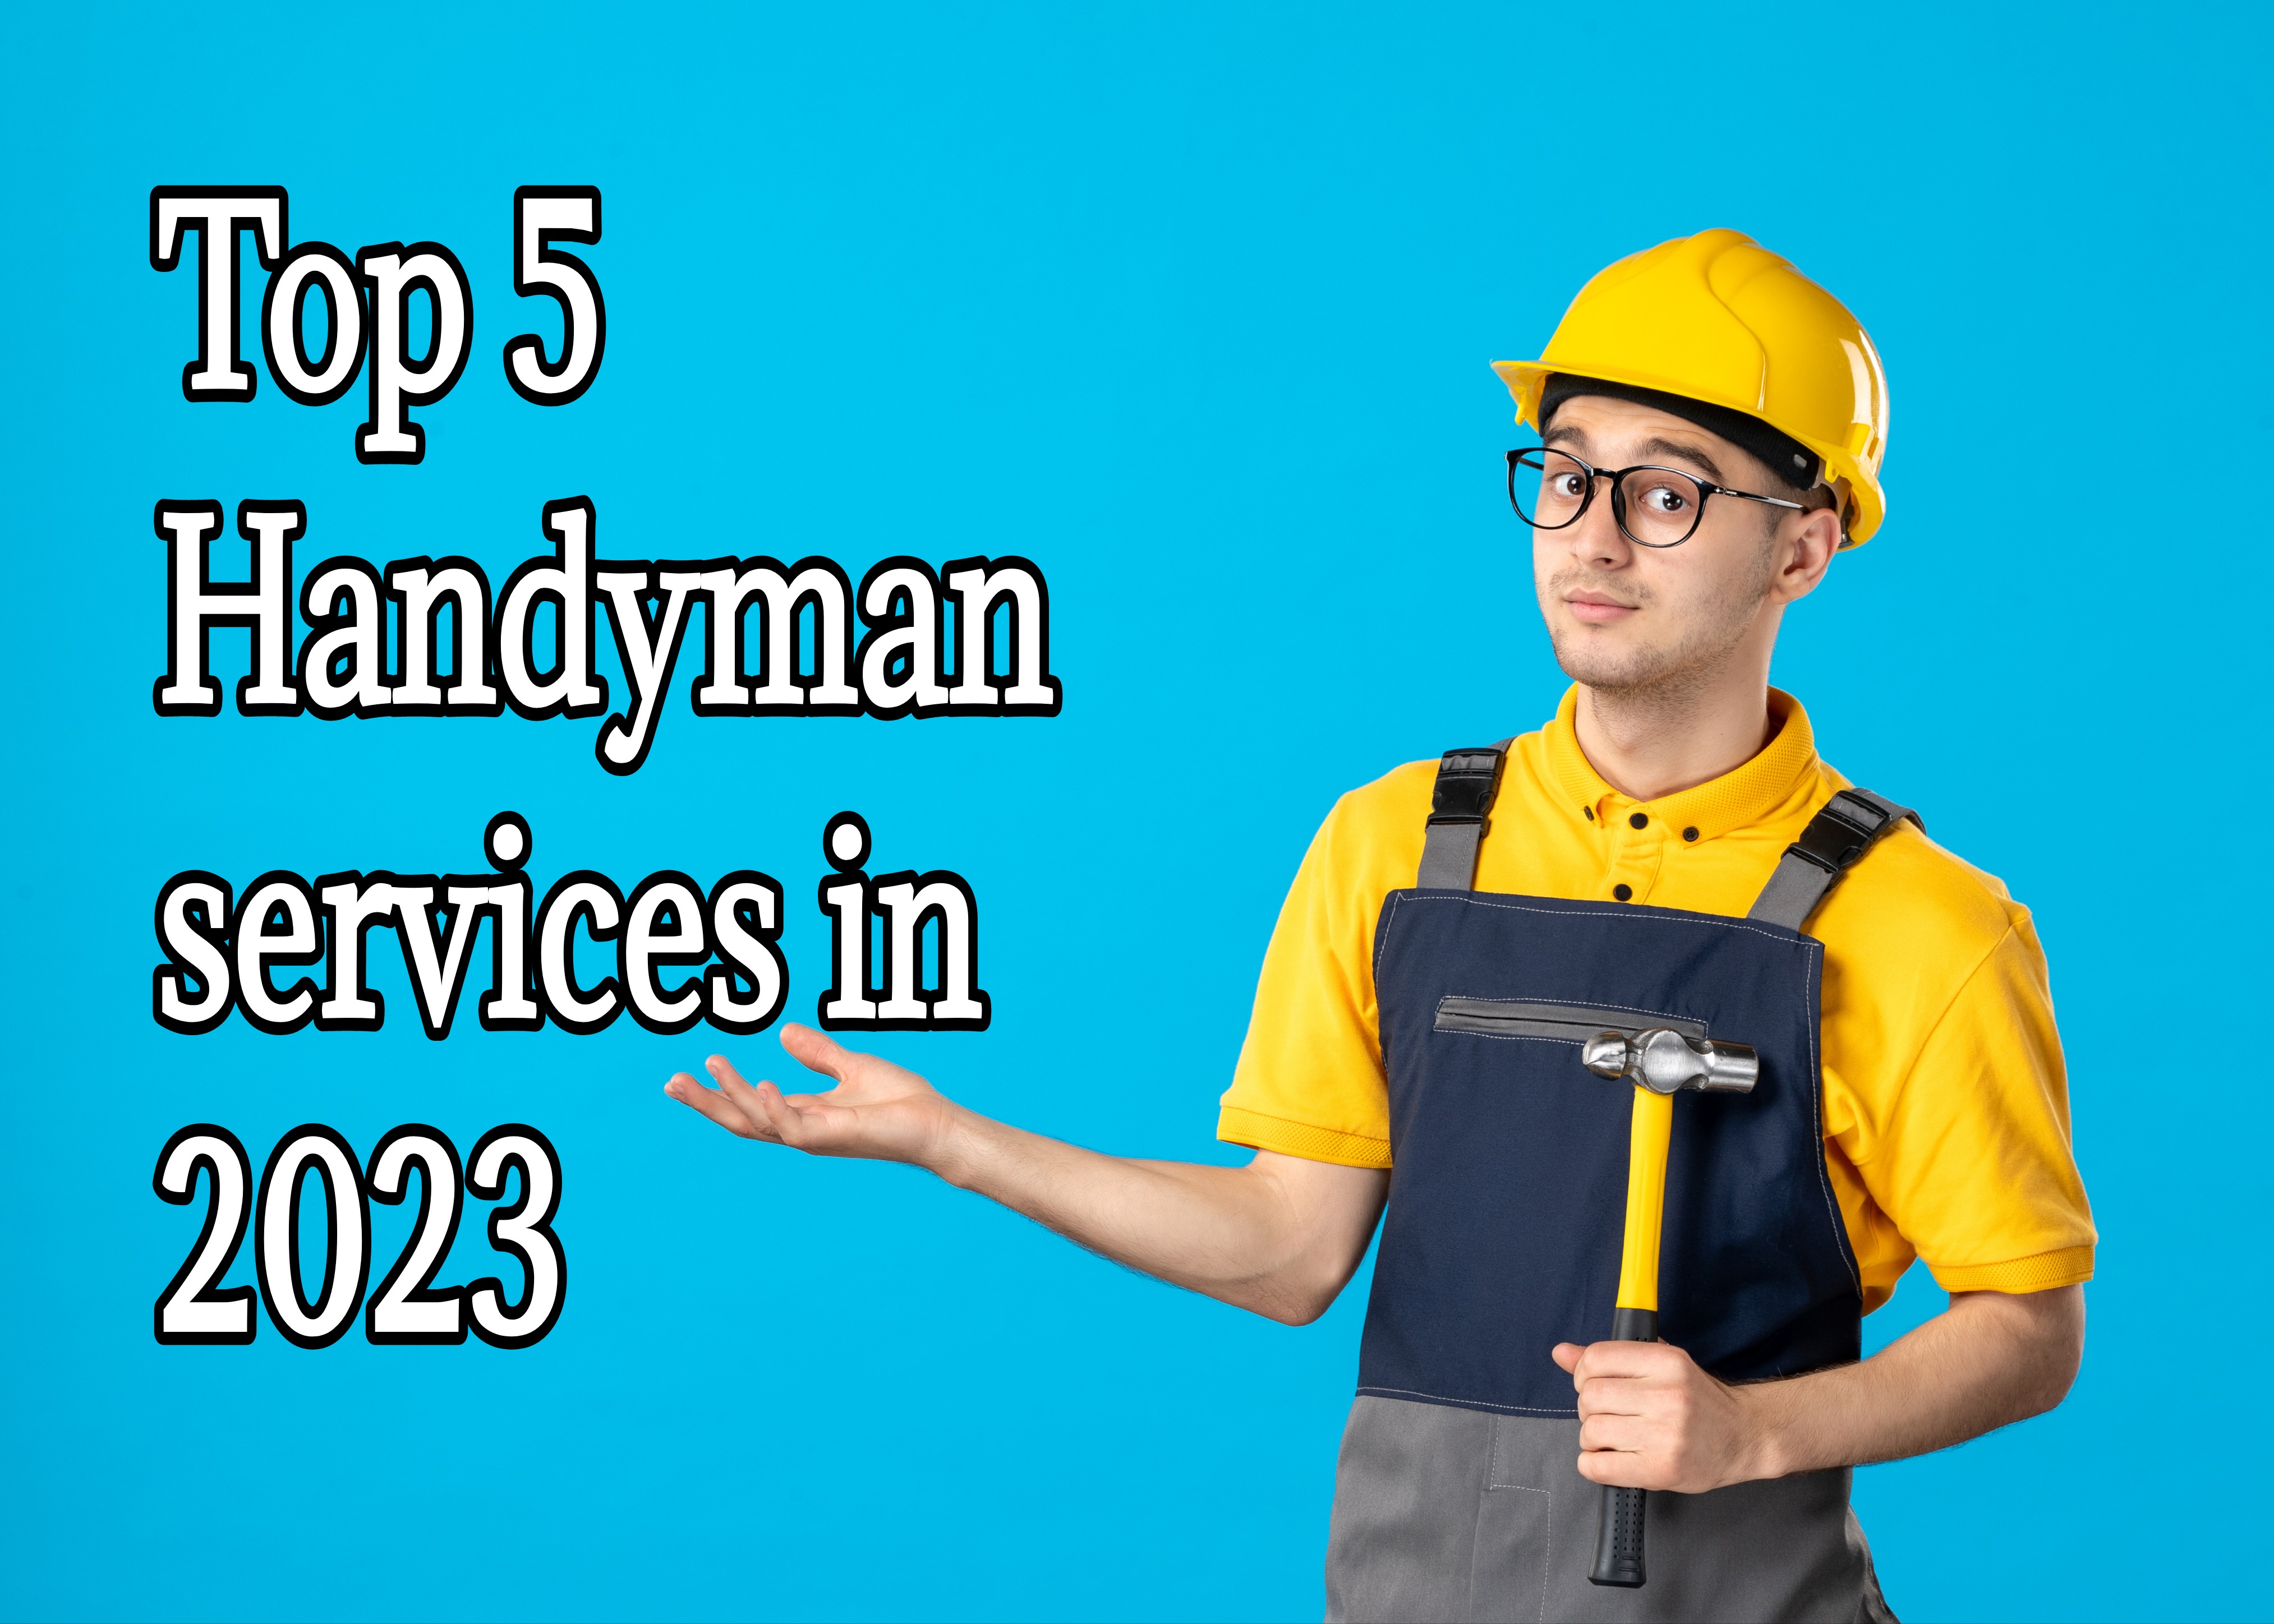 5 Ondemand handyman services that every home needs in 2023